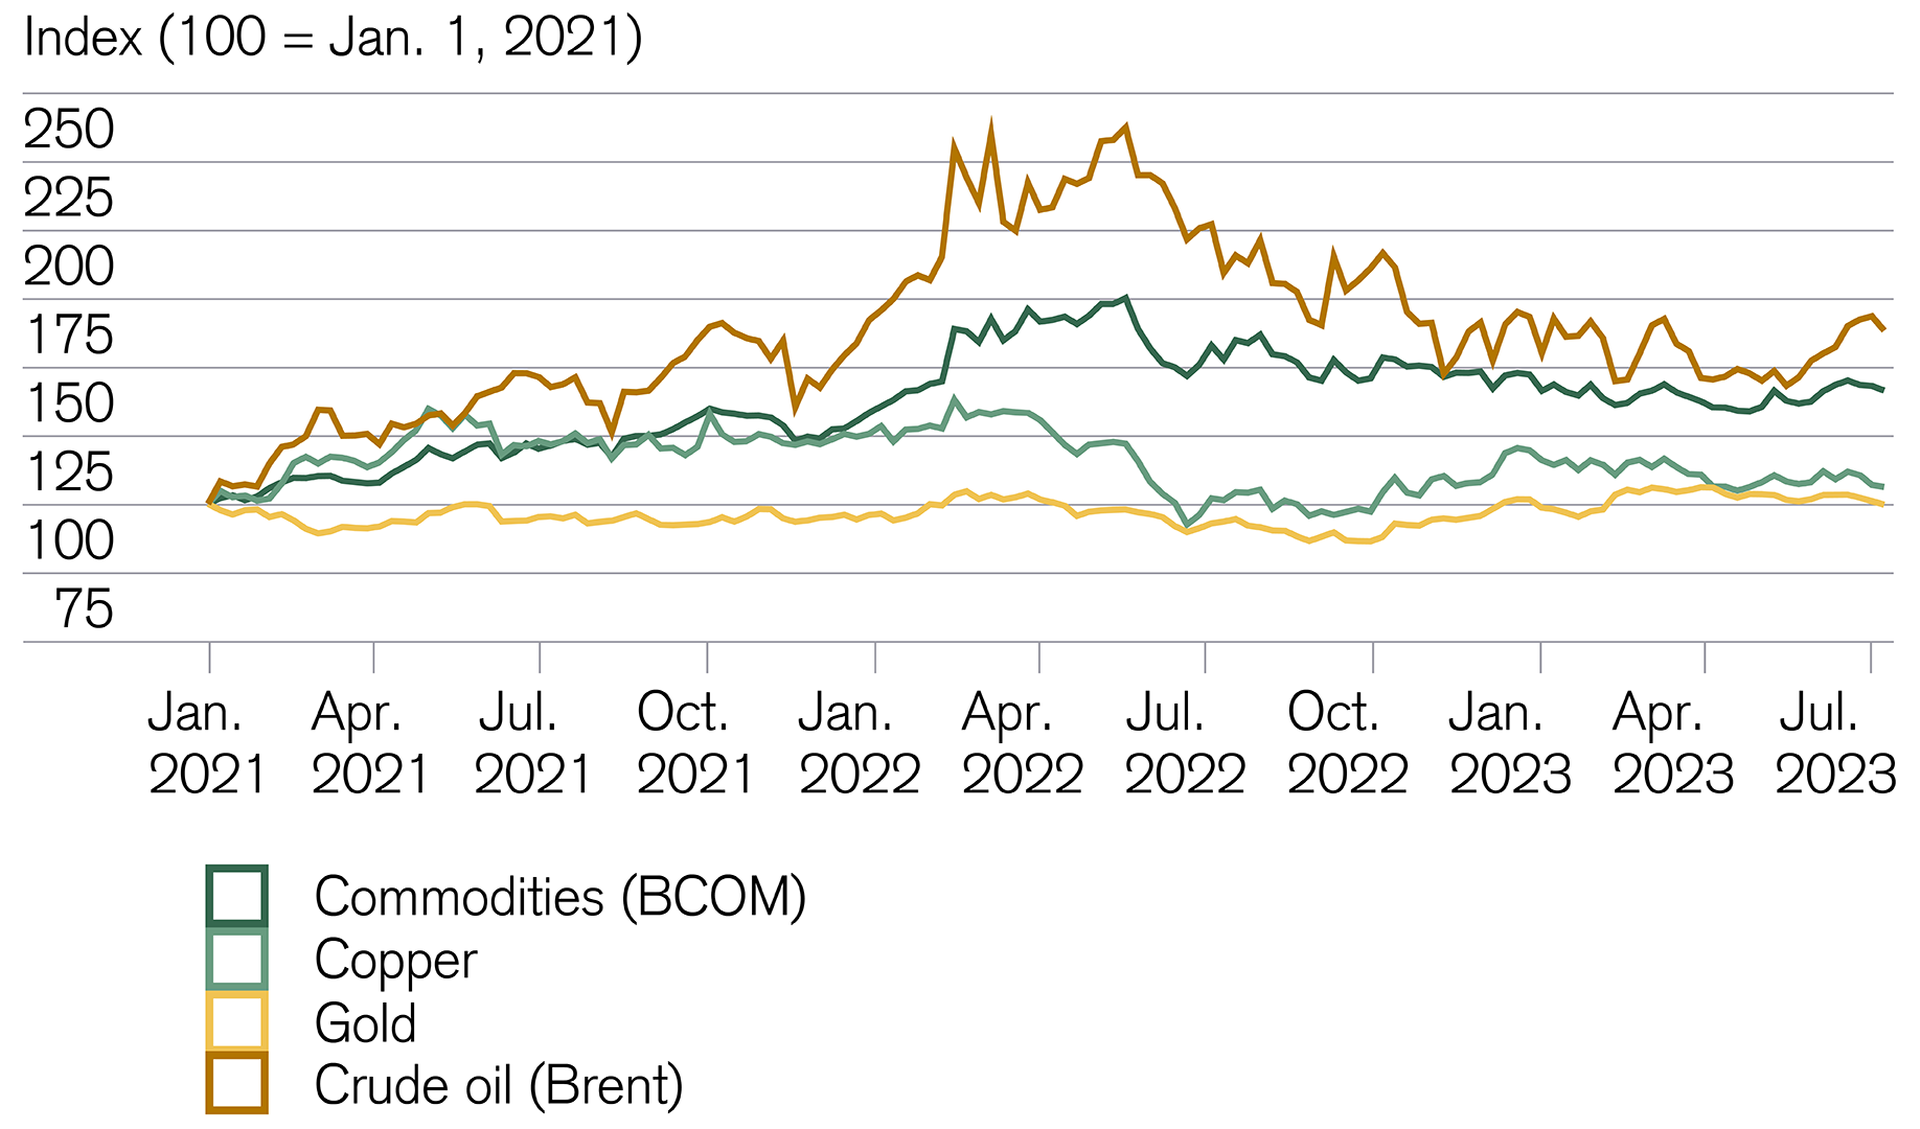 Commodities: Higher oil prices